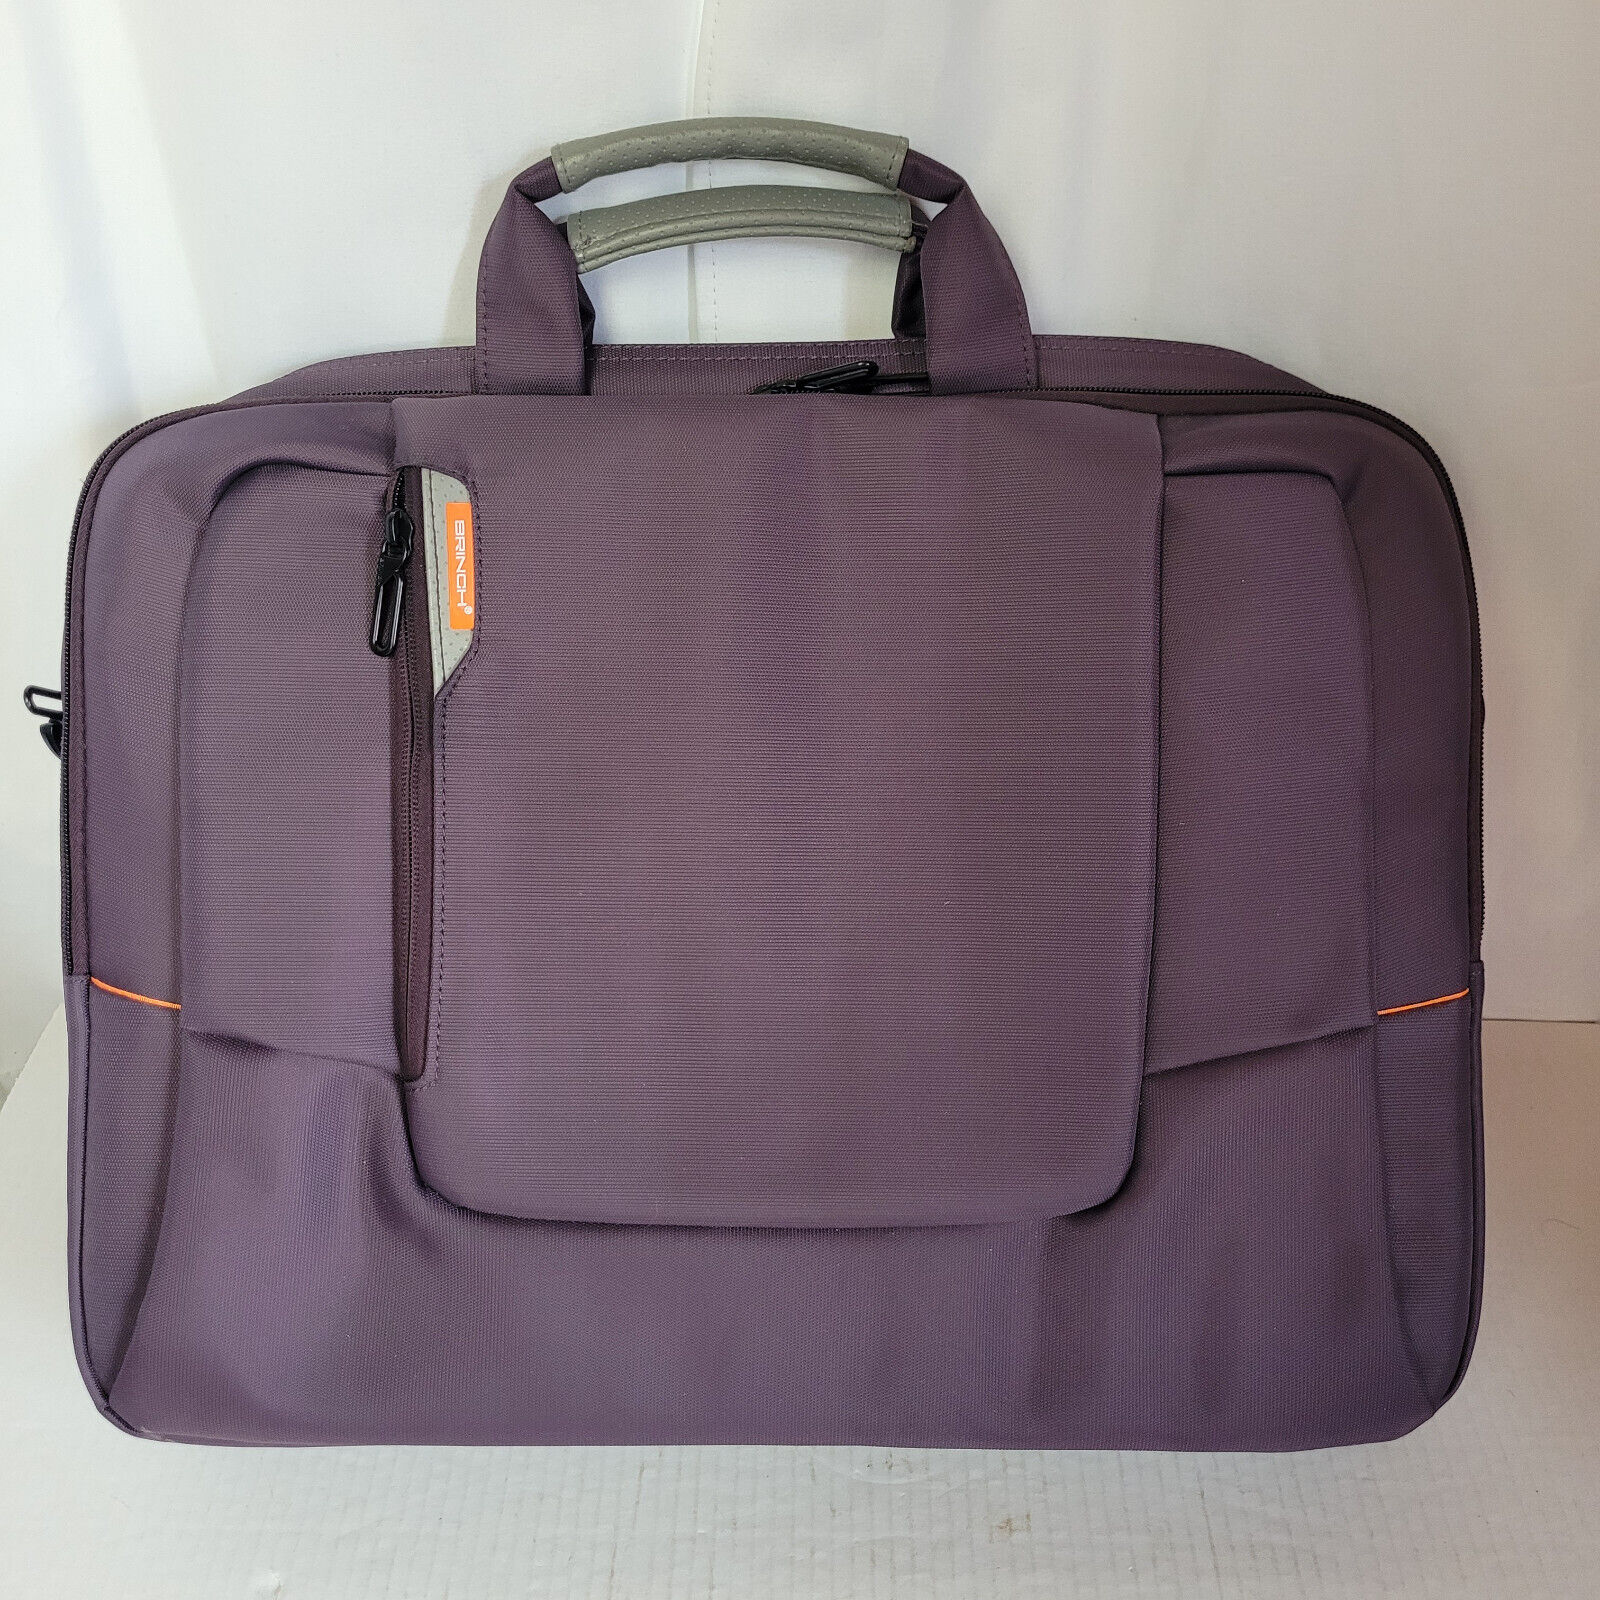 BRINCH Plum Purple Lap Top Bag - 17 x 12in - Lots of Pockets & Compartments